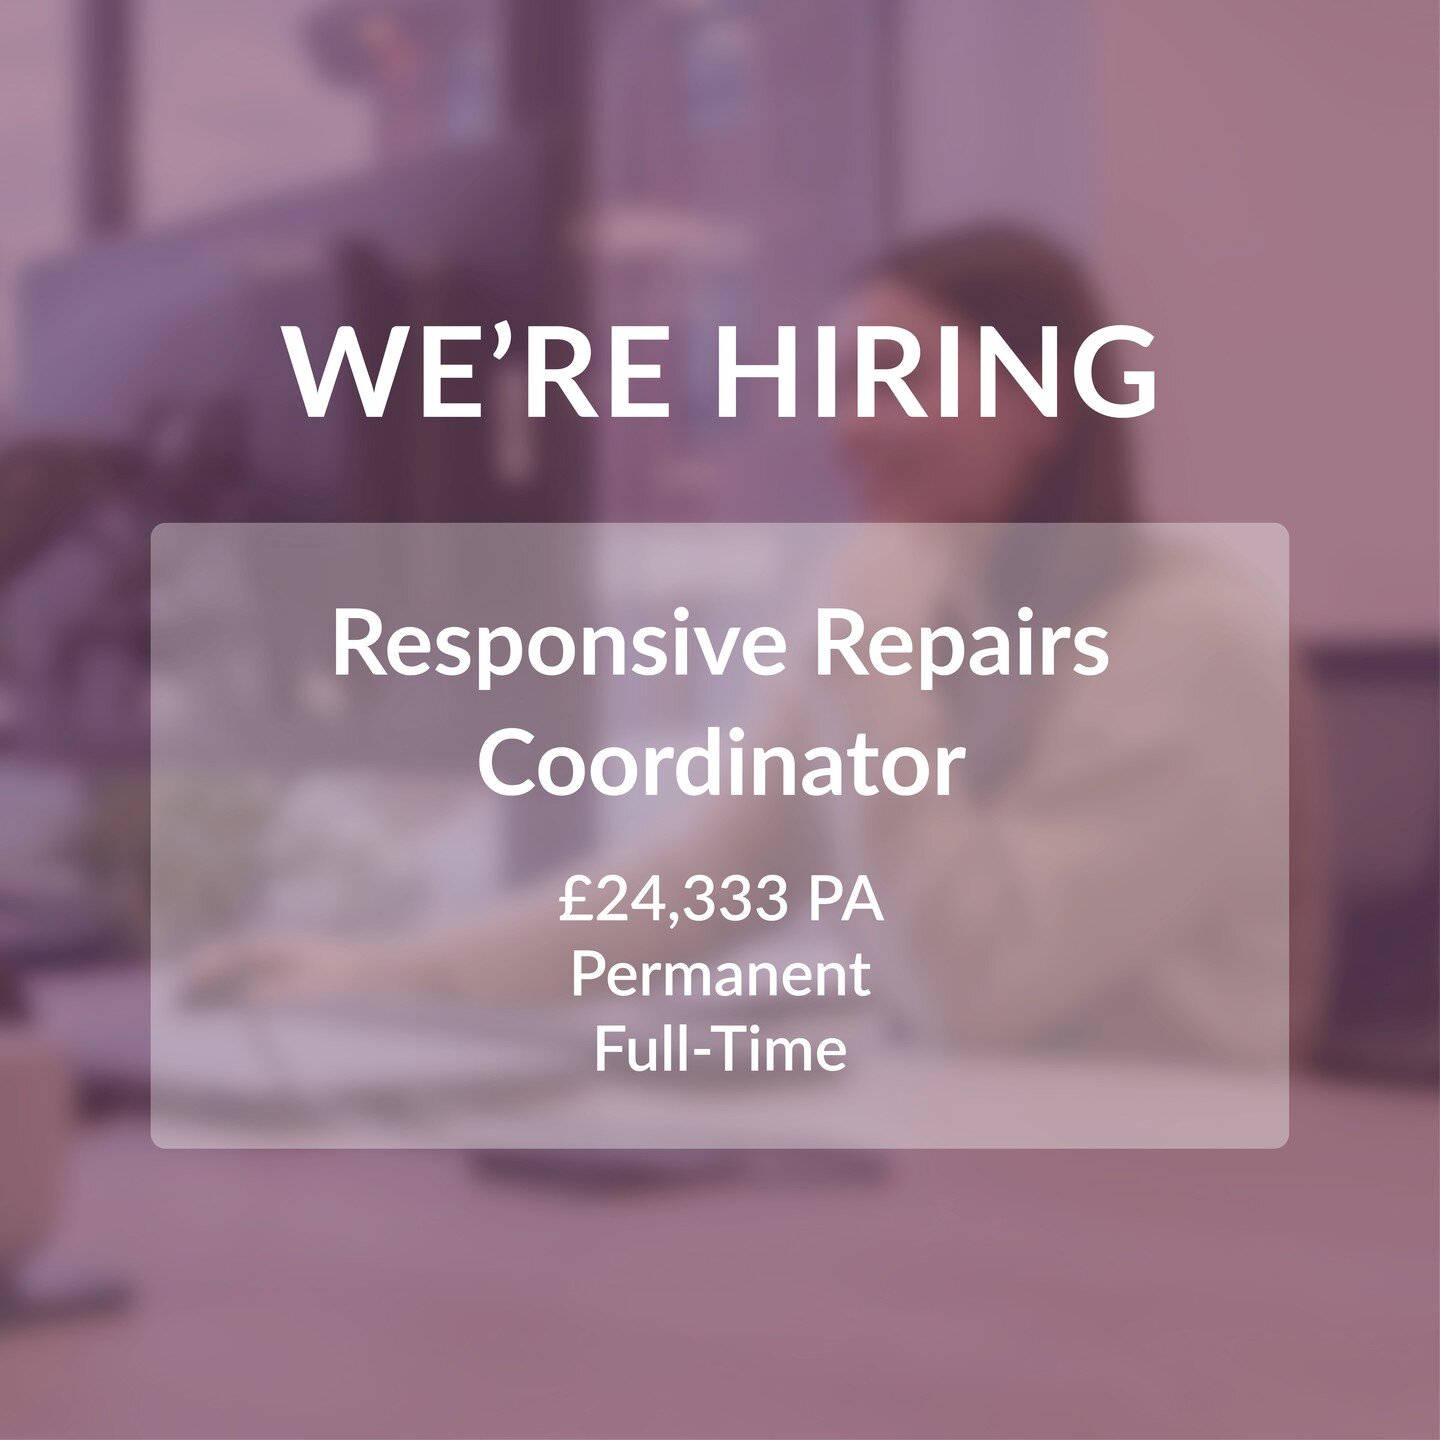 We're Hiring. 📢

We're looking for an enthusiastic Responsive Repairs Coordinator to provide a first point of contact for customer repair enquiries. #UKHousing

If you're interested in joining our expanding team, please let us know by clicking the l